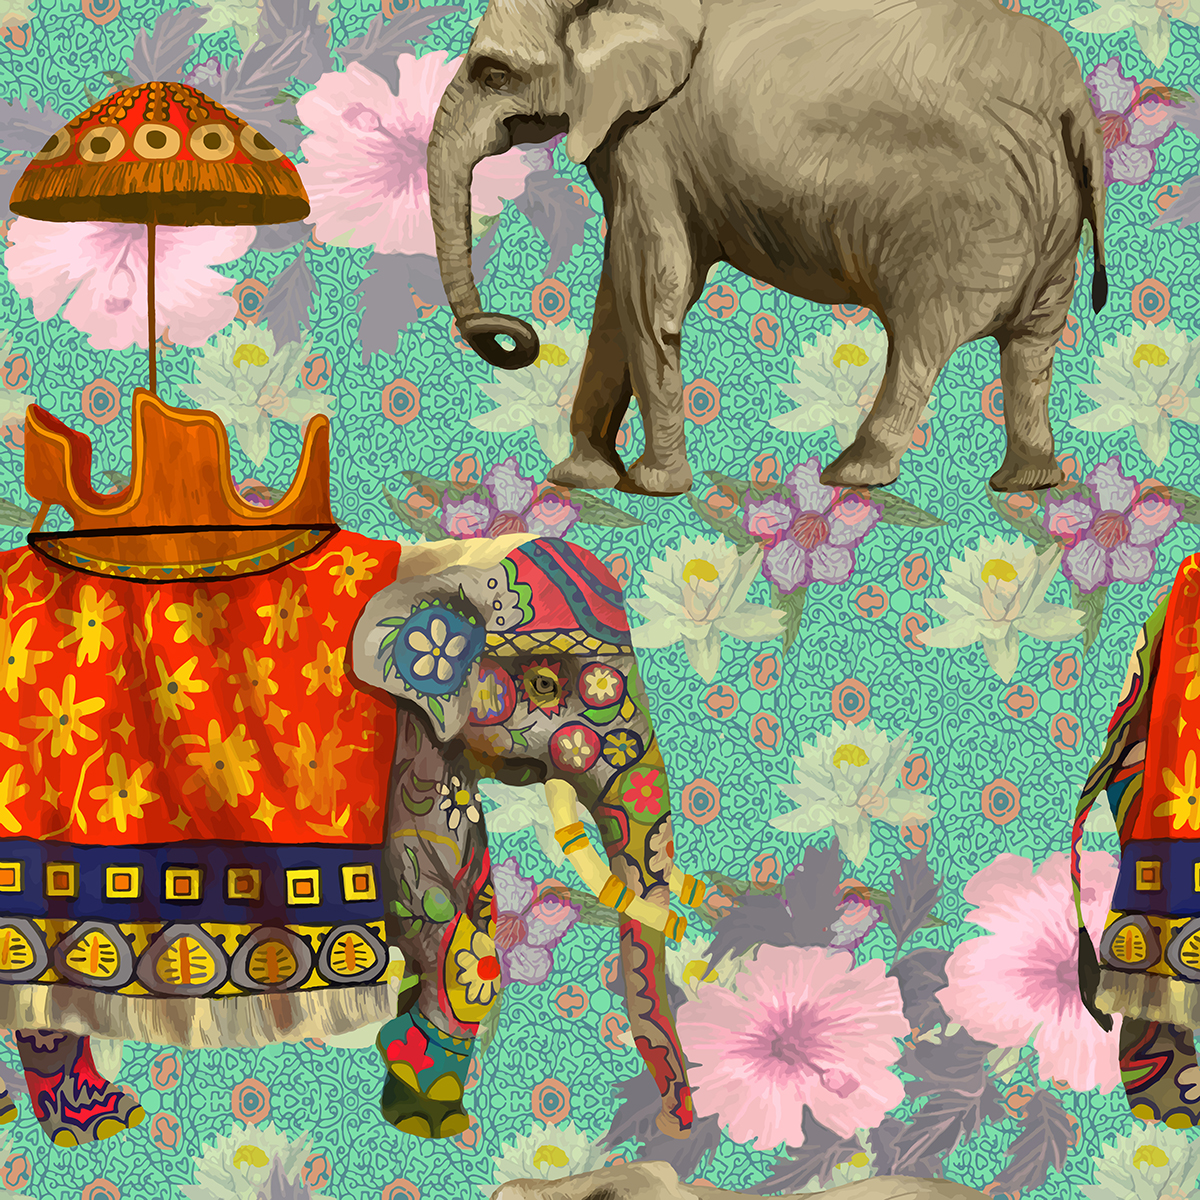 A pattern of elephants and flowers